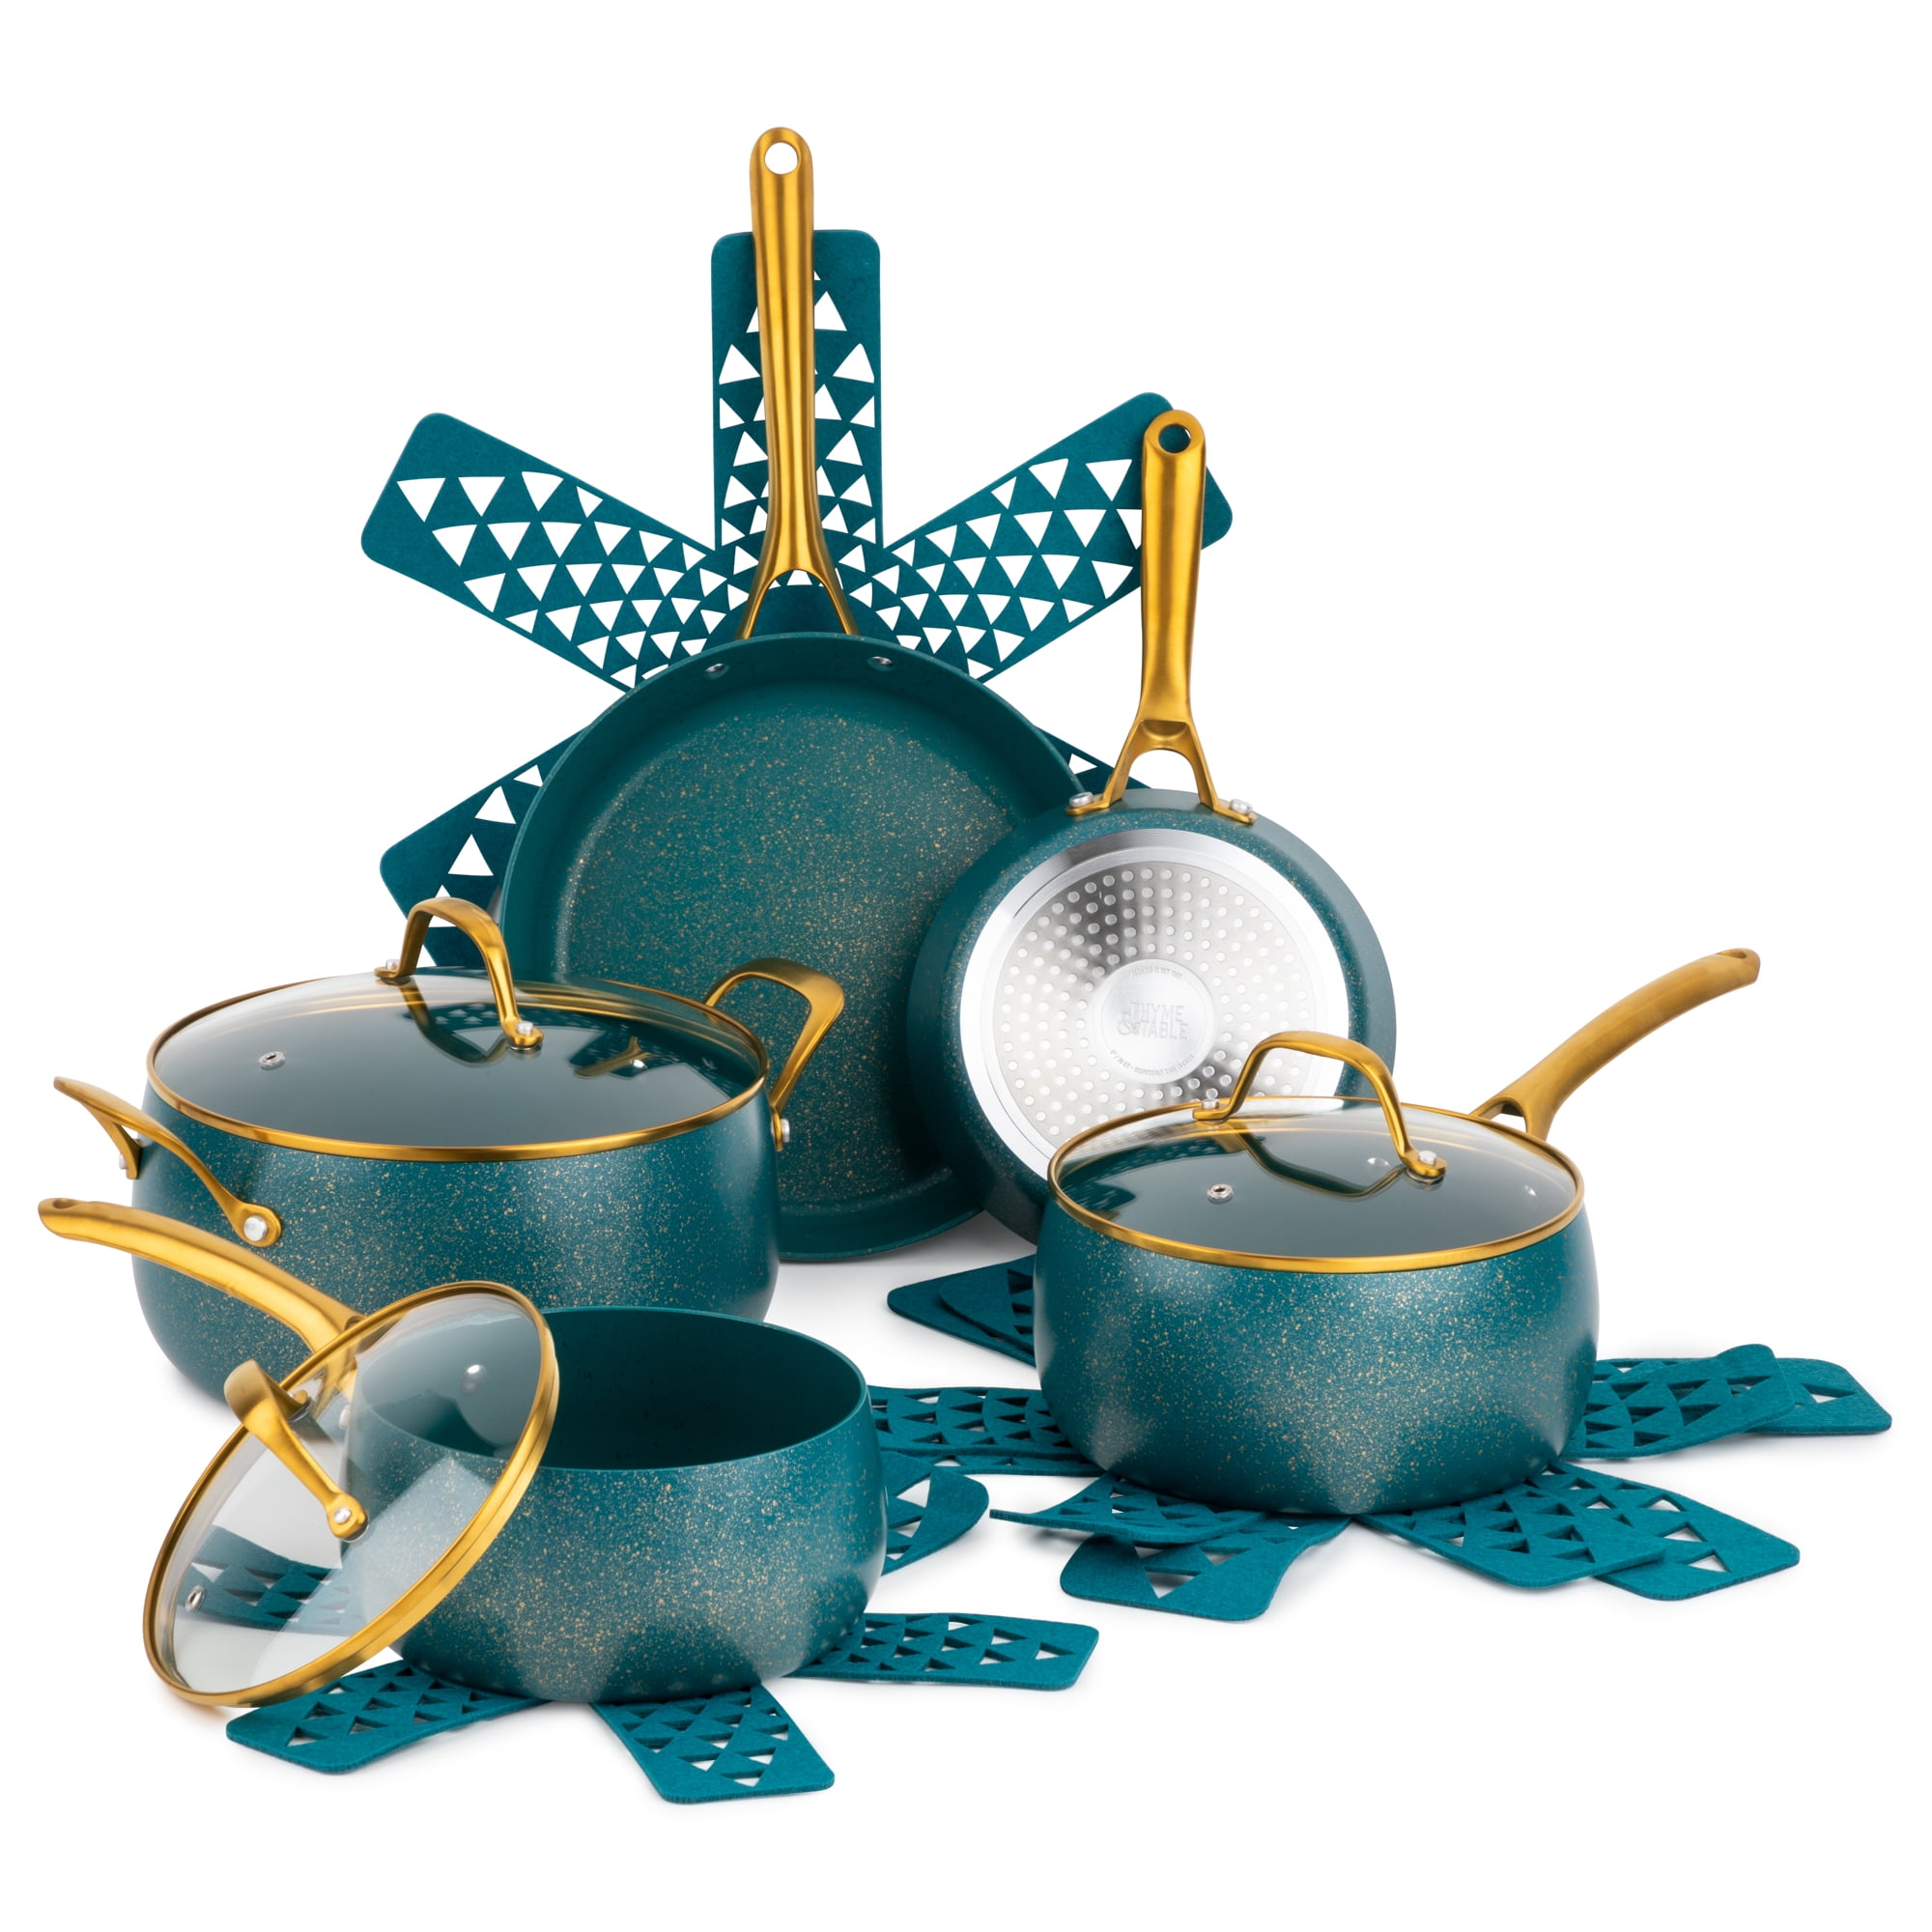 Thyme & Table Nonstick Willow Cookware, 12-Piece Set, Peacock Blue